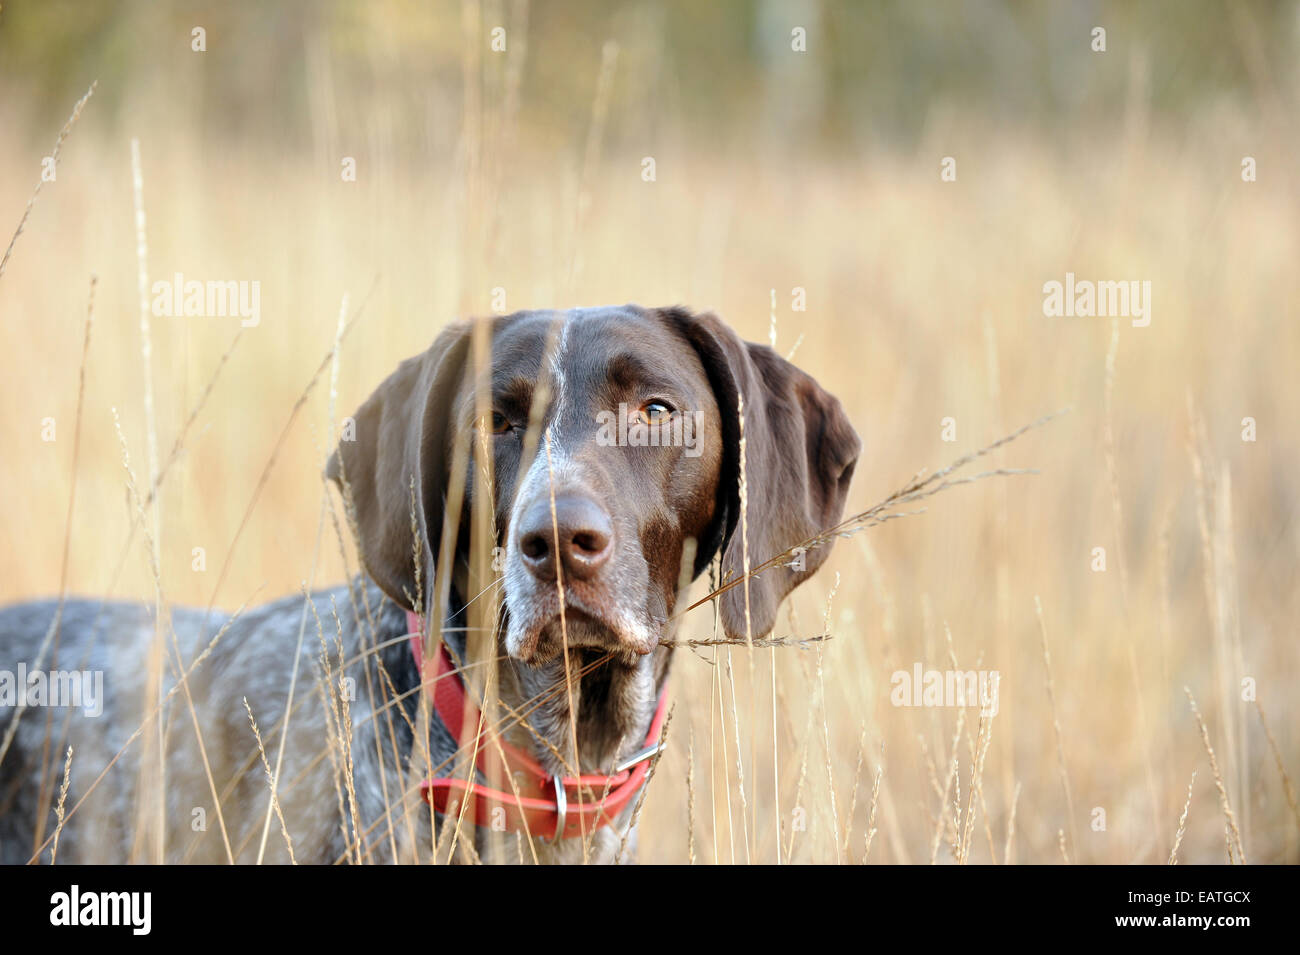 A German Shorthaired Pointer in the autumn fields Stock Photo